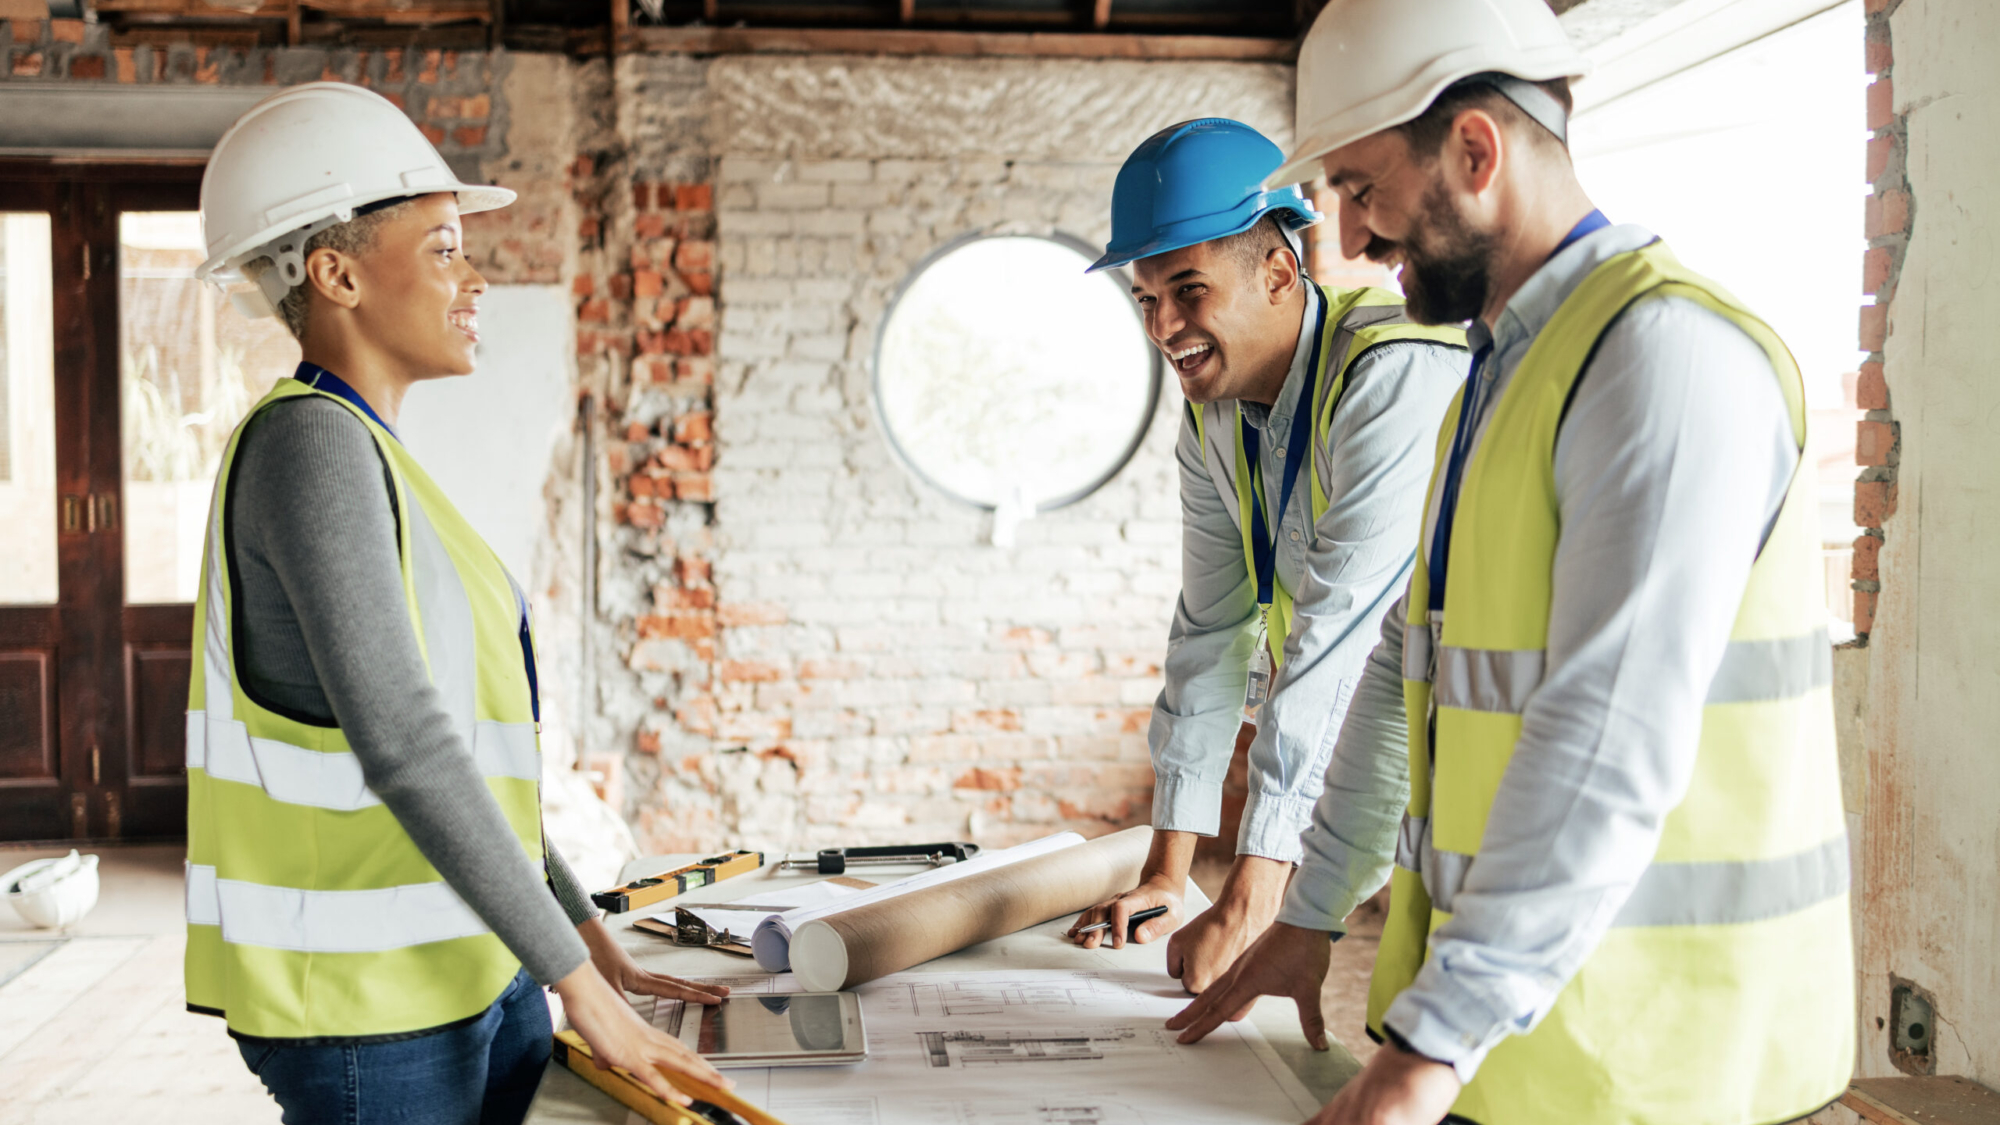 Looking to boost your construction business through effective advertising? Look no further than Gott Marketing! Discover how our specialized expertise in construction industry advertising can help you reach your target audience and drive growth.